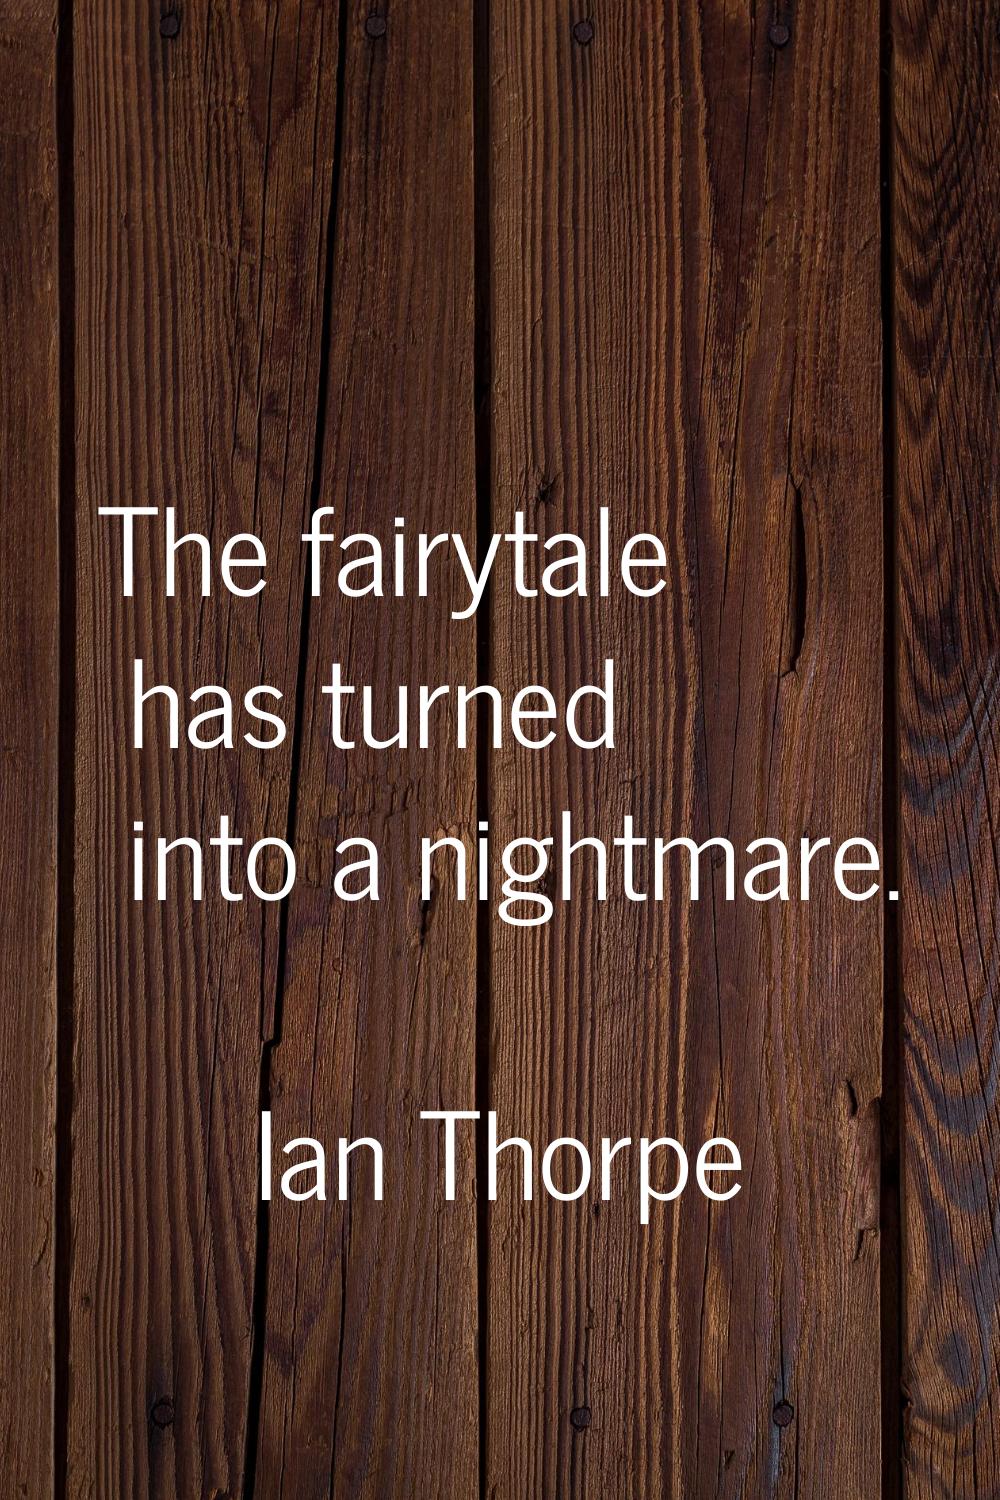 The fairytale has turned into a nightmare.